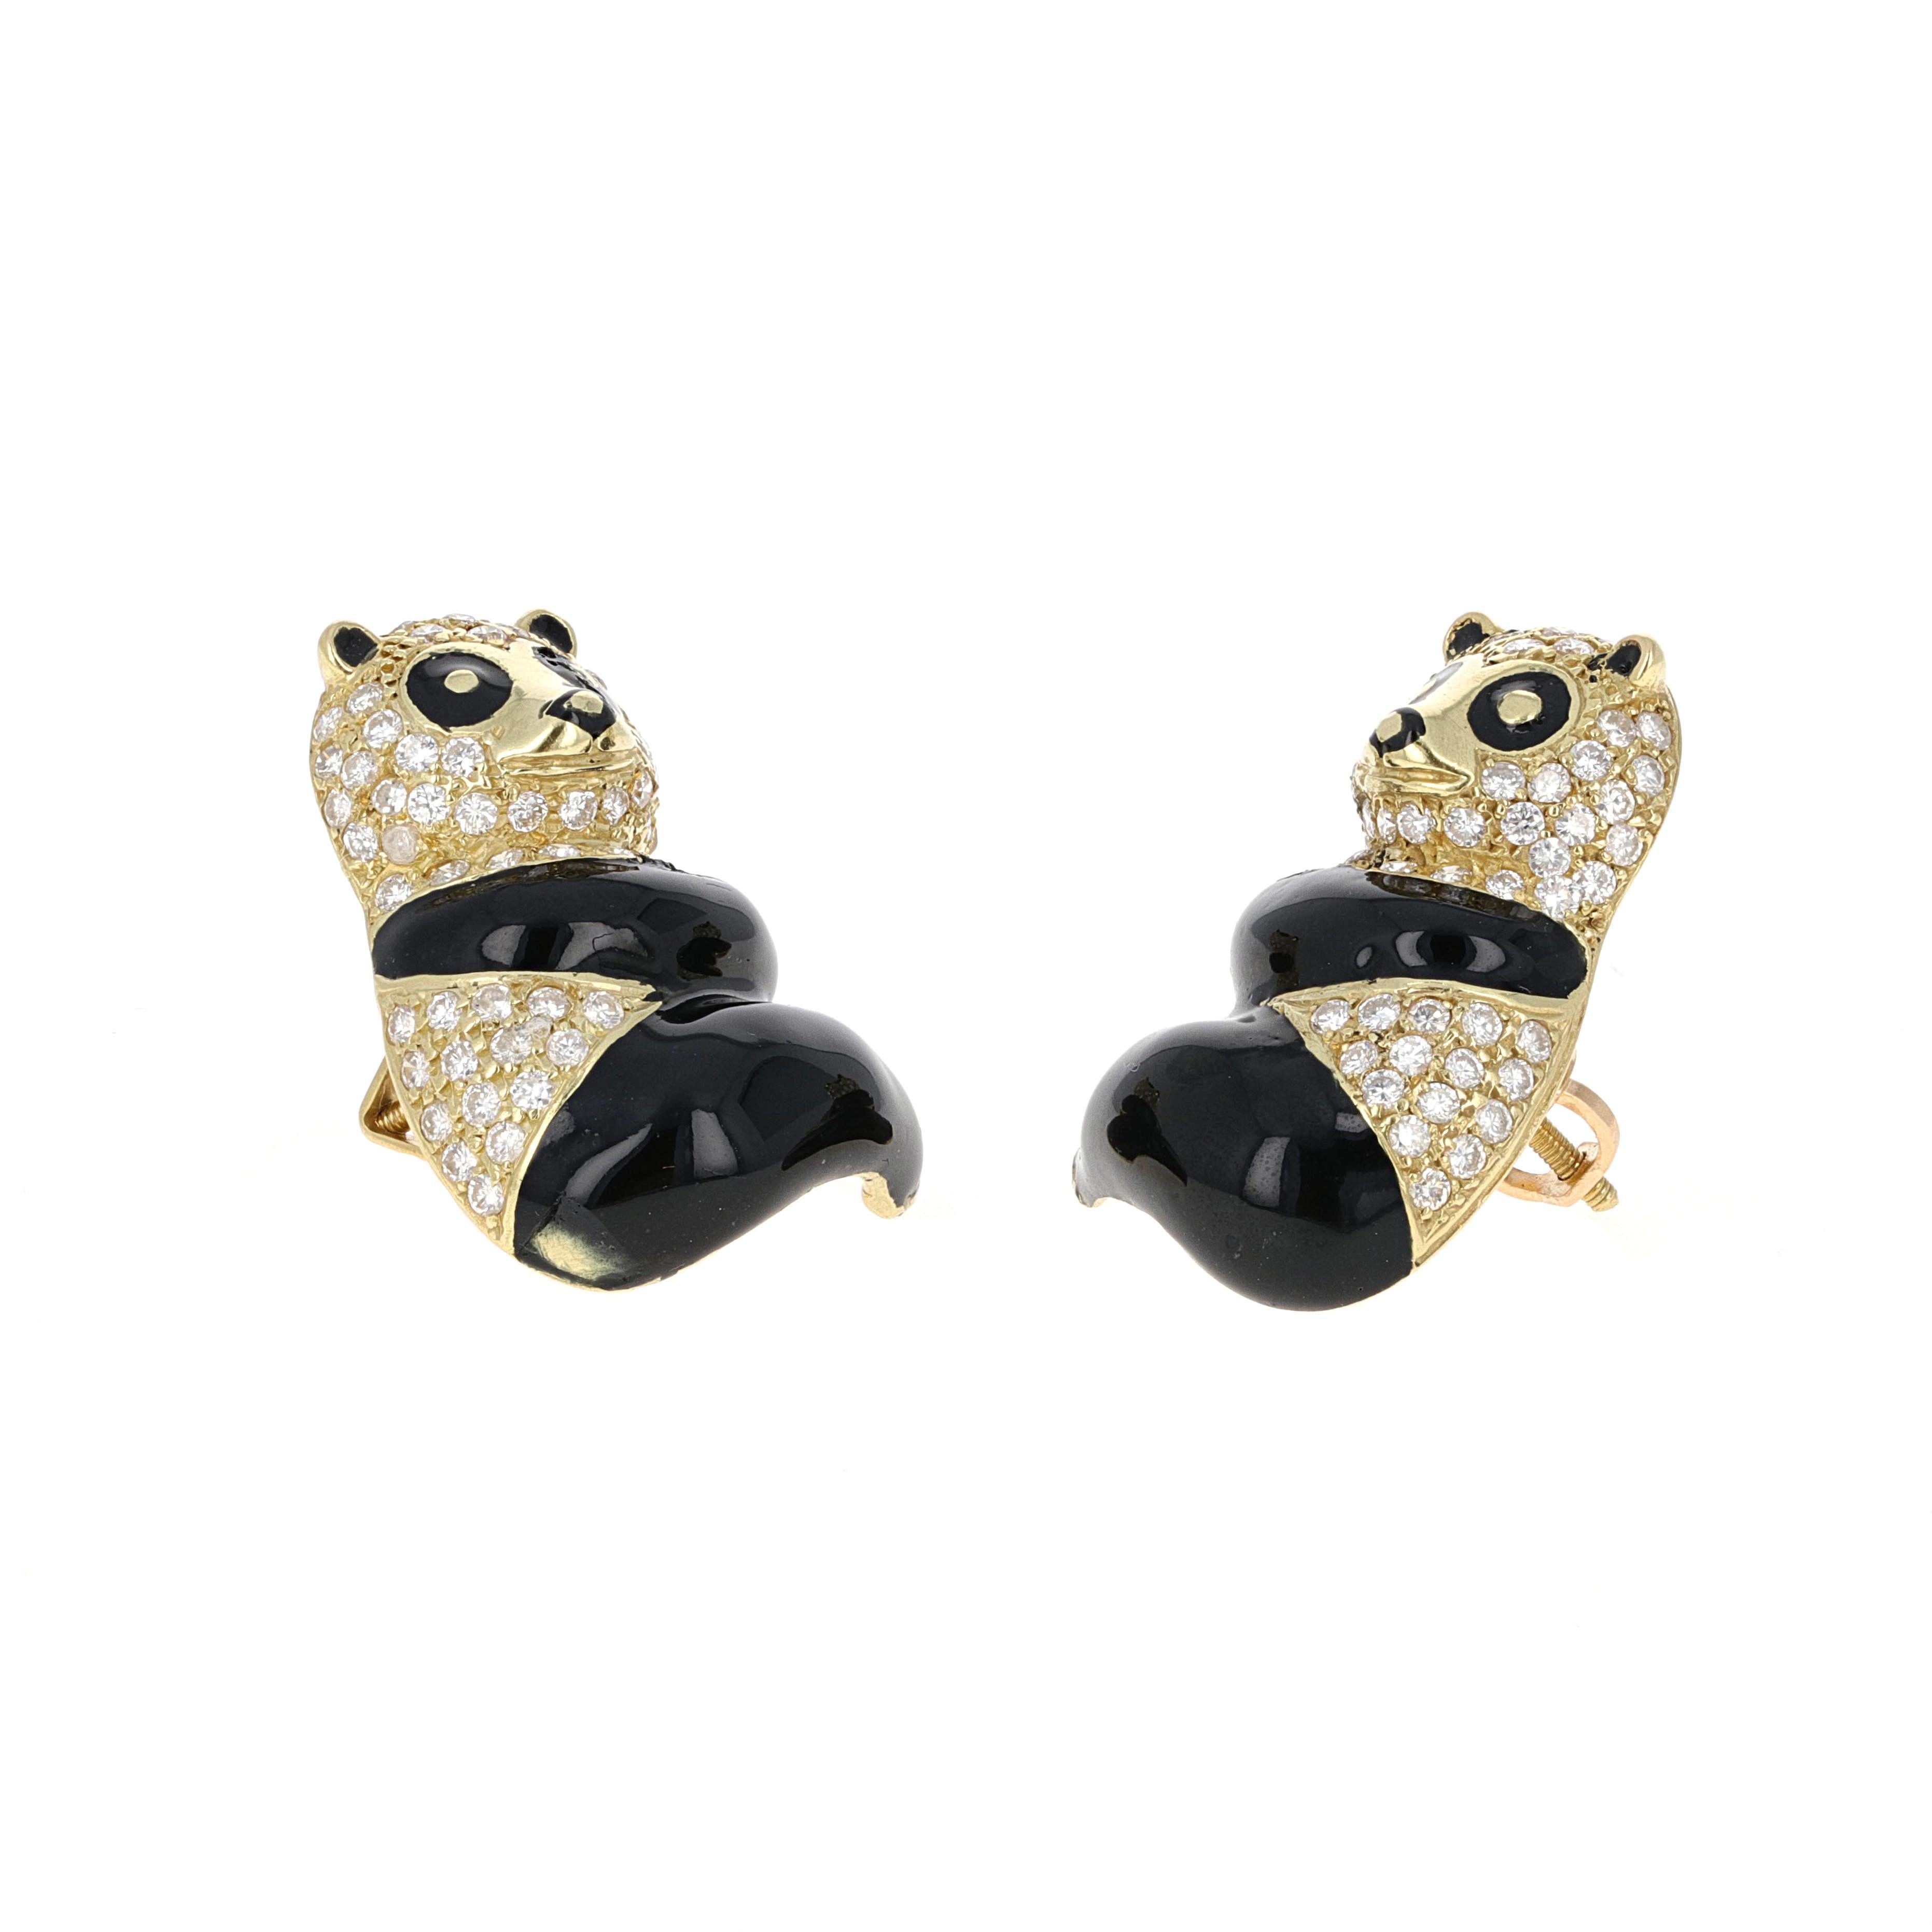 These adorable 18 karat yellow gold Panda bear earrings are adorned with round brilliant white diamonds. The earrings have 114 round brilliant diamonds weighing an estimated 1.14 carats total weight. The body, eyes nose and ears are black enamel.